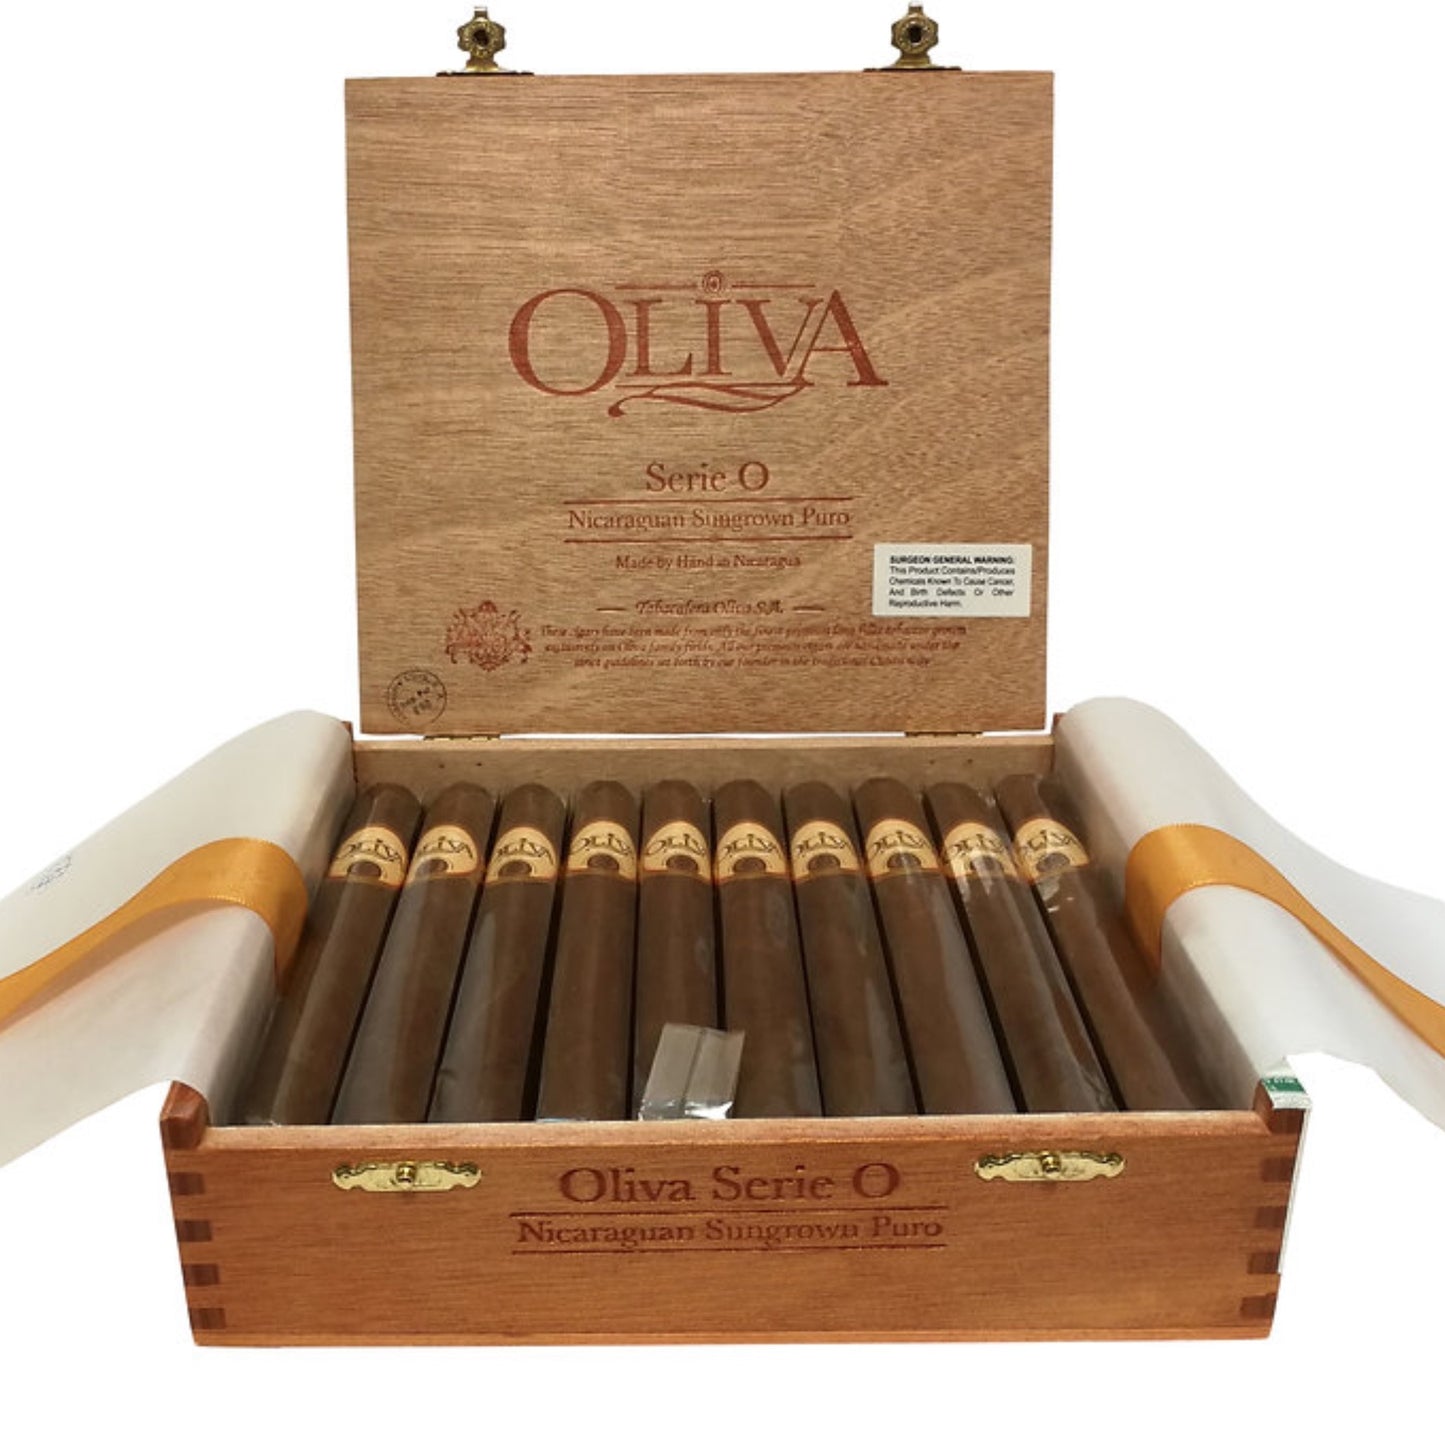 Load image into Gallery viewer, Oliva Serie O Box of 20 Cigars
